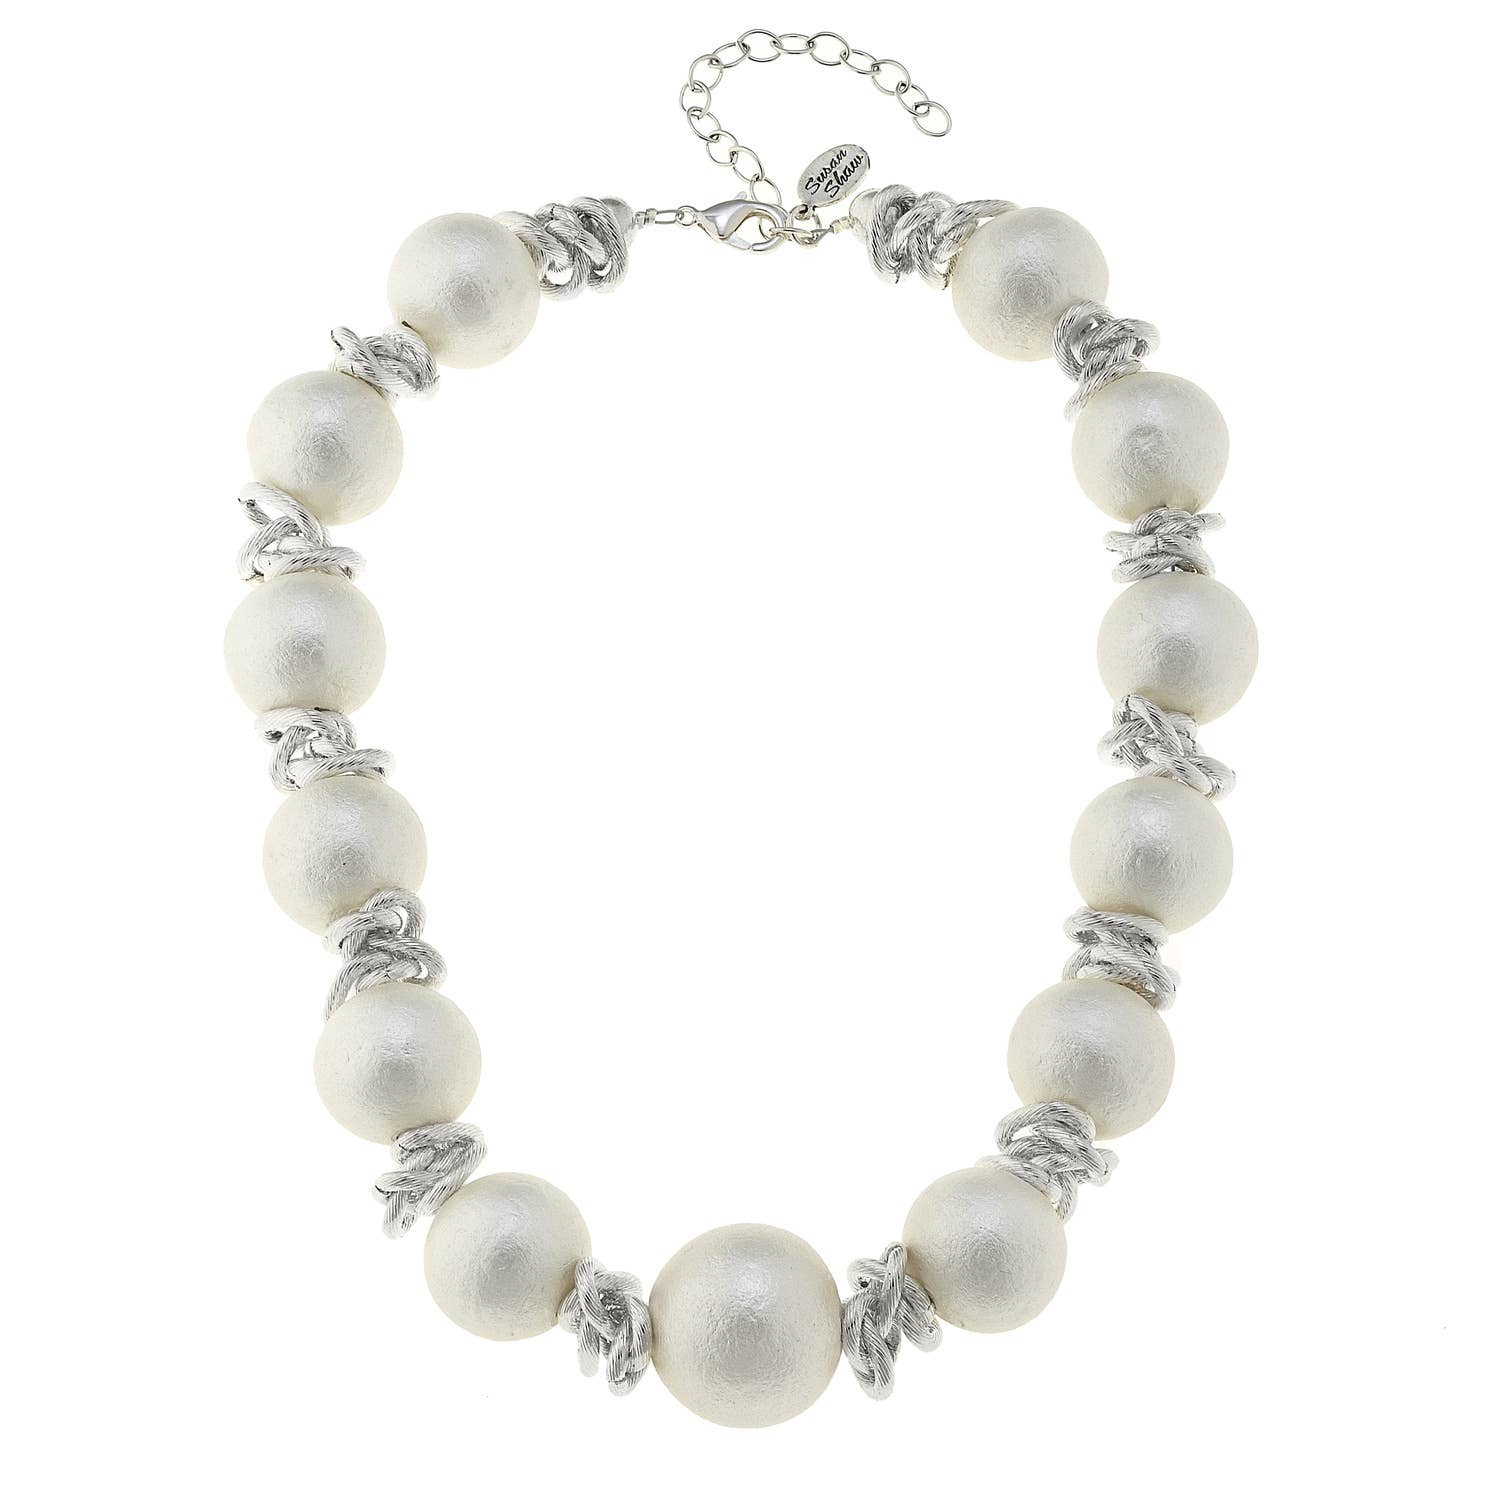 Susan Shaw - Handcast Silver and White Cotton Pearl Choker